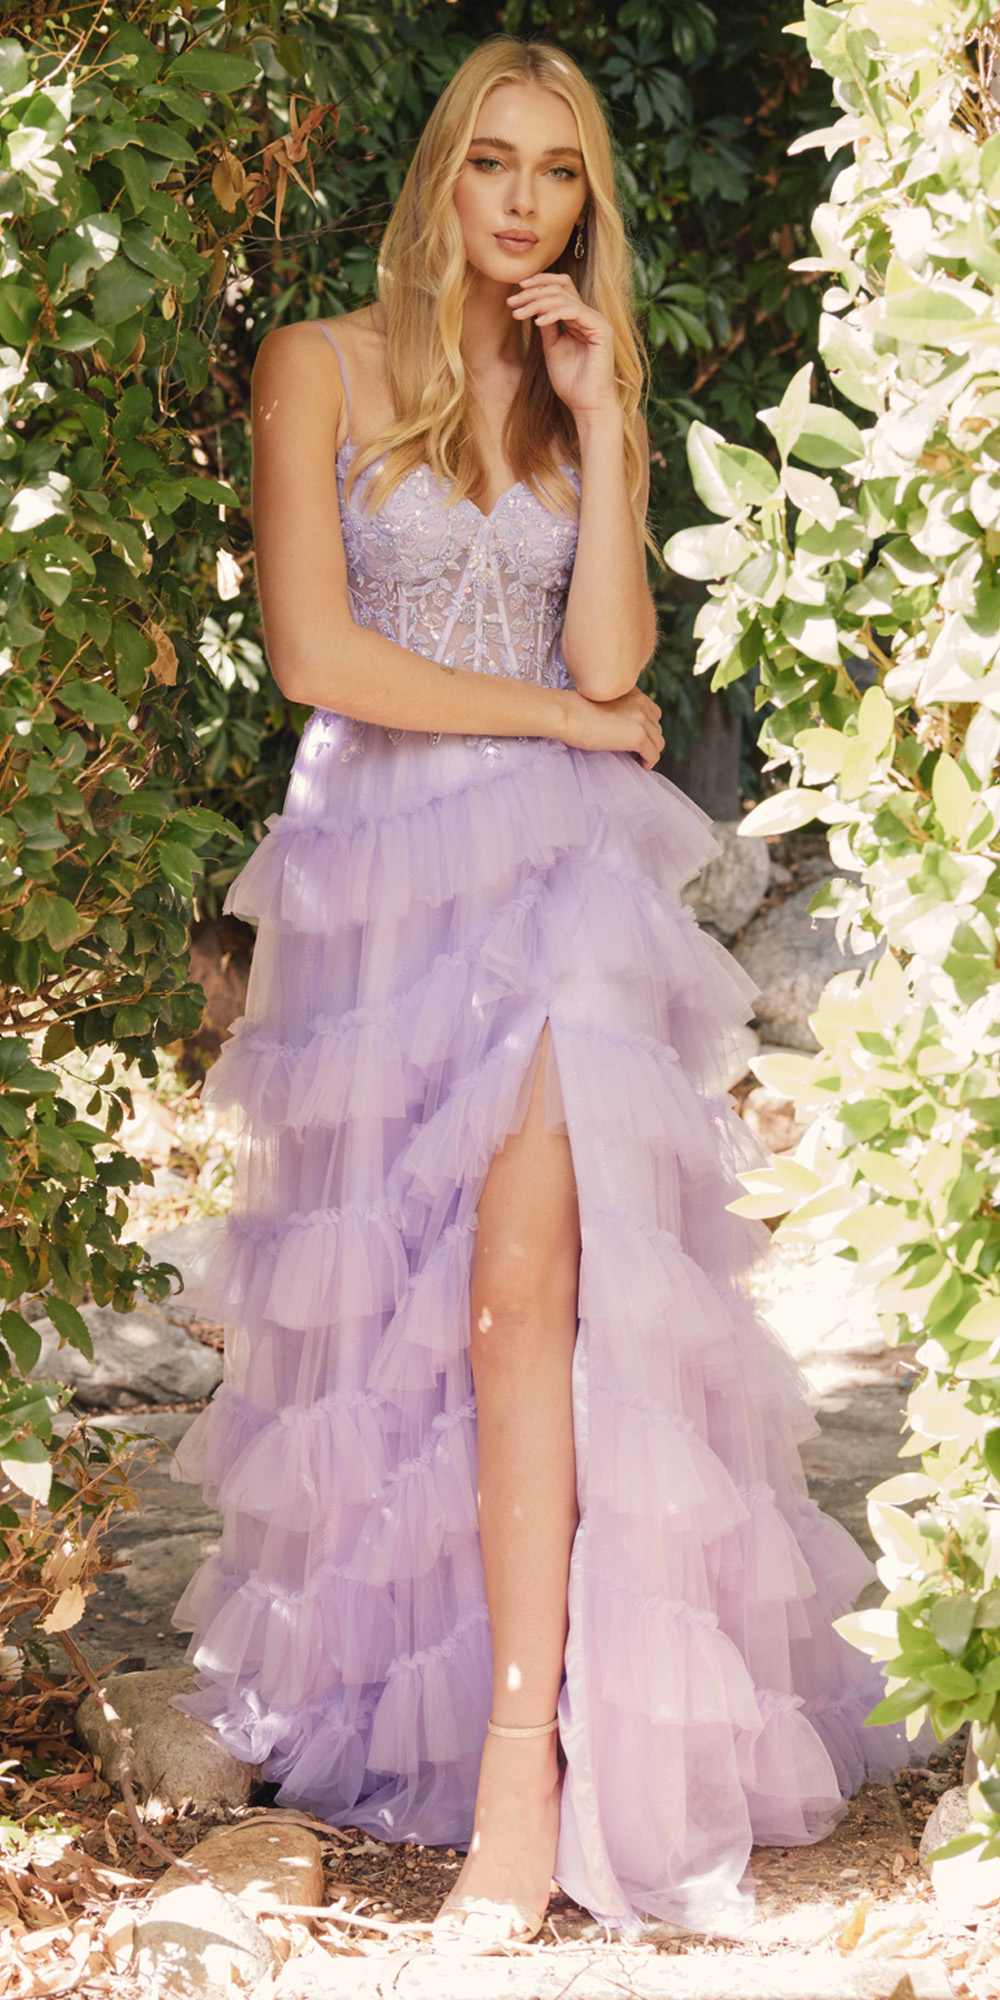 Juliet JT2459A Tiered Ruffled Glitter Tulle A-Line Gown Corset Bodice